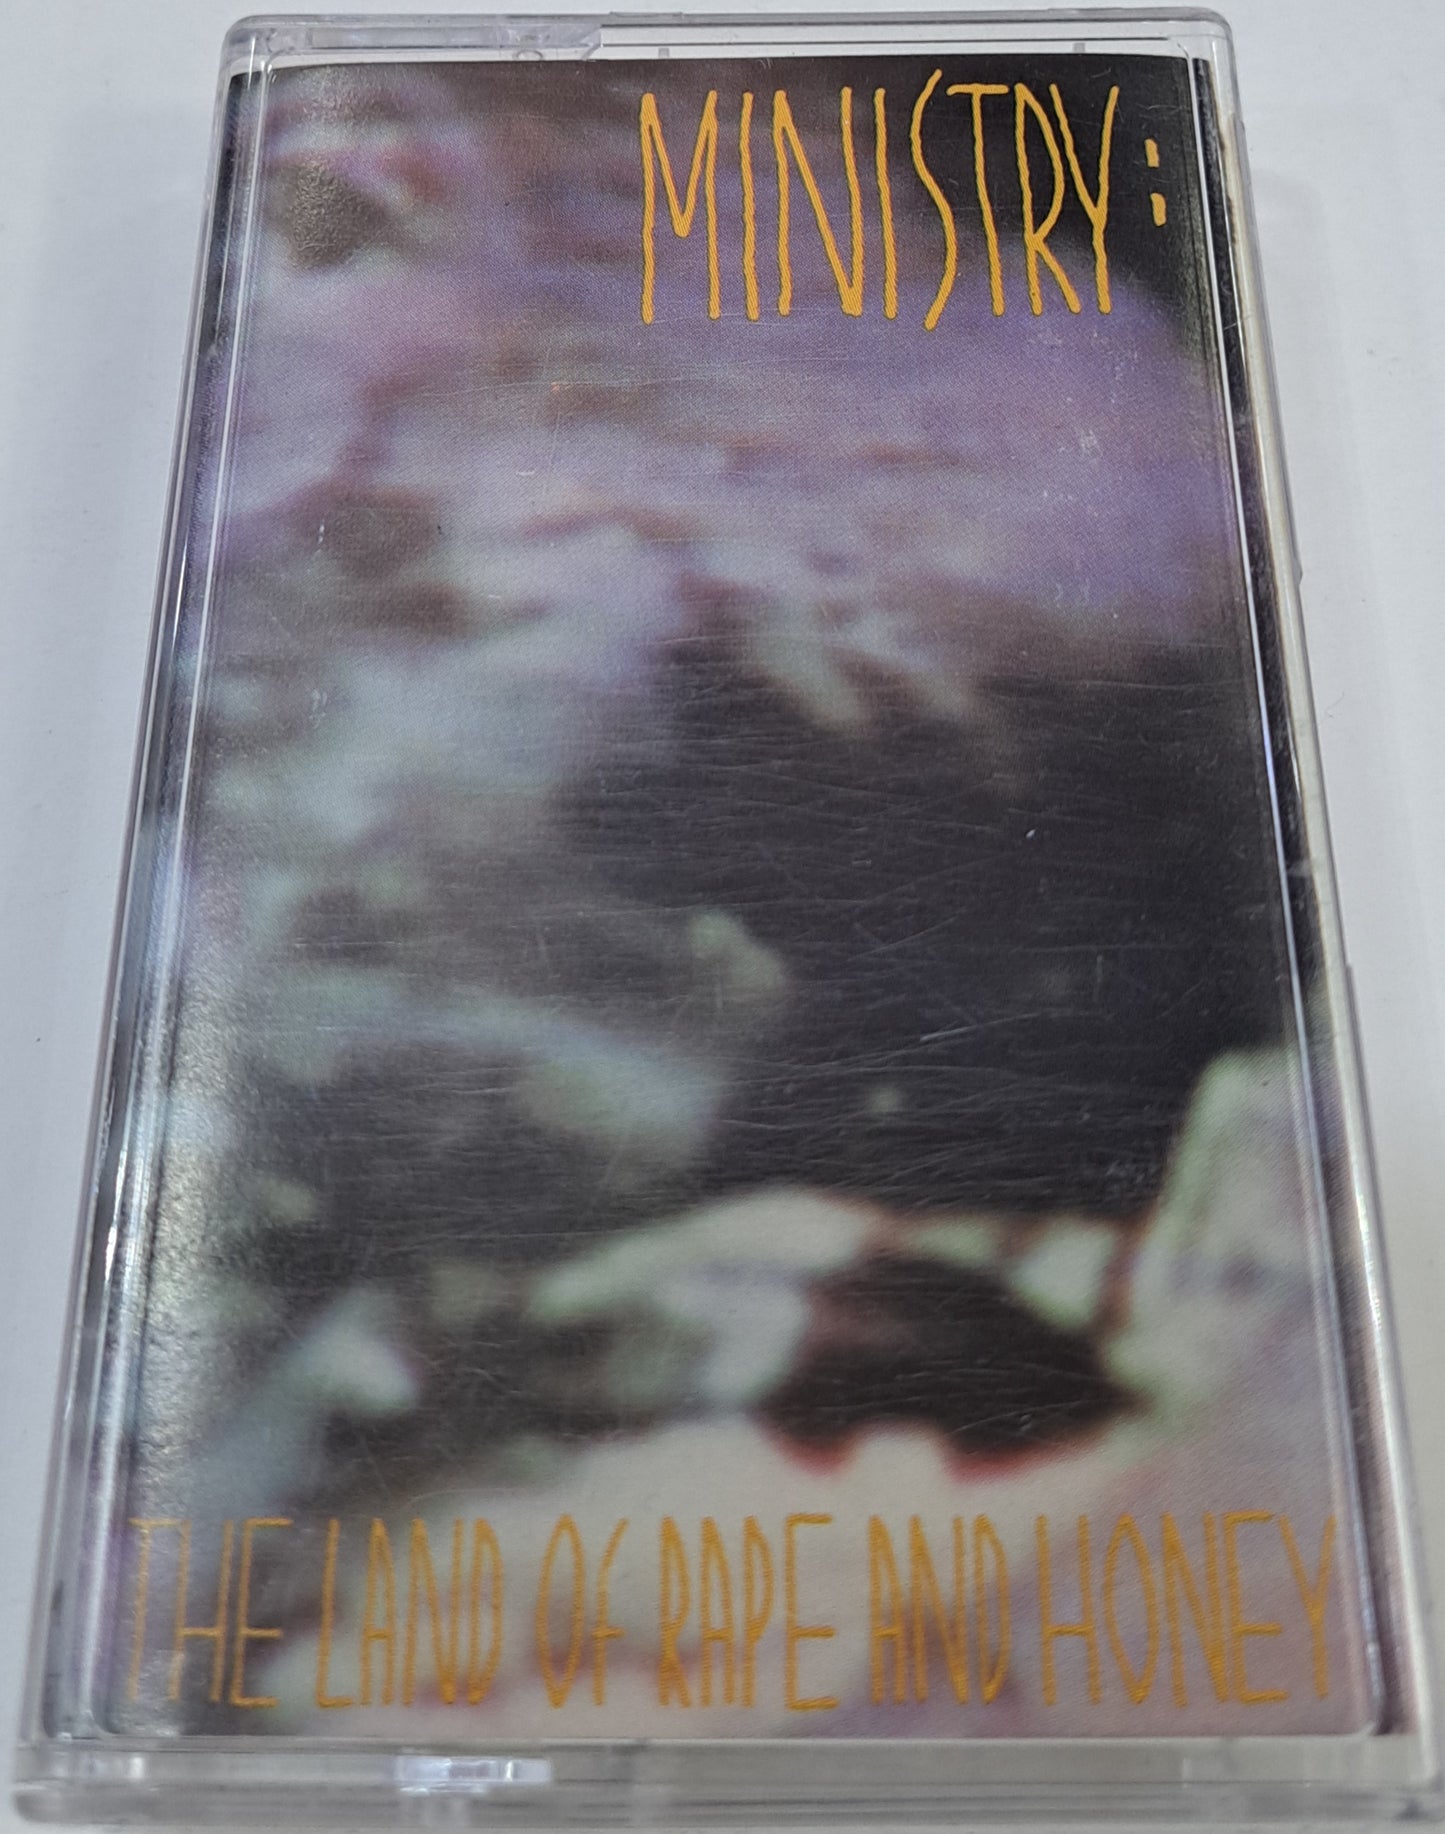 MINISTRY - THE LAND OF RAPE AND HONEY CASSETTE